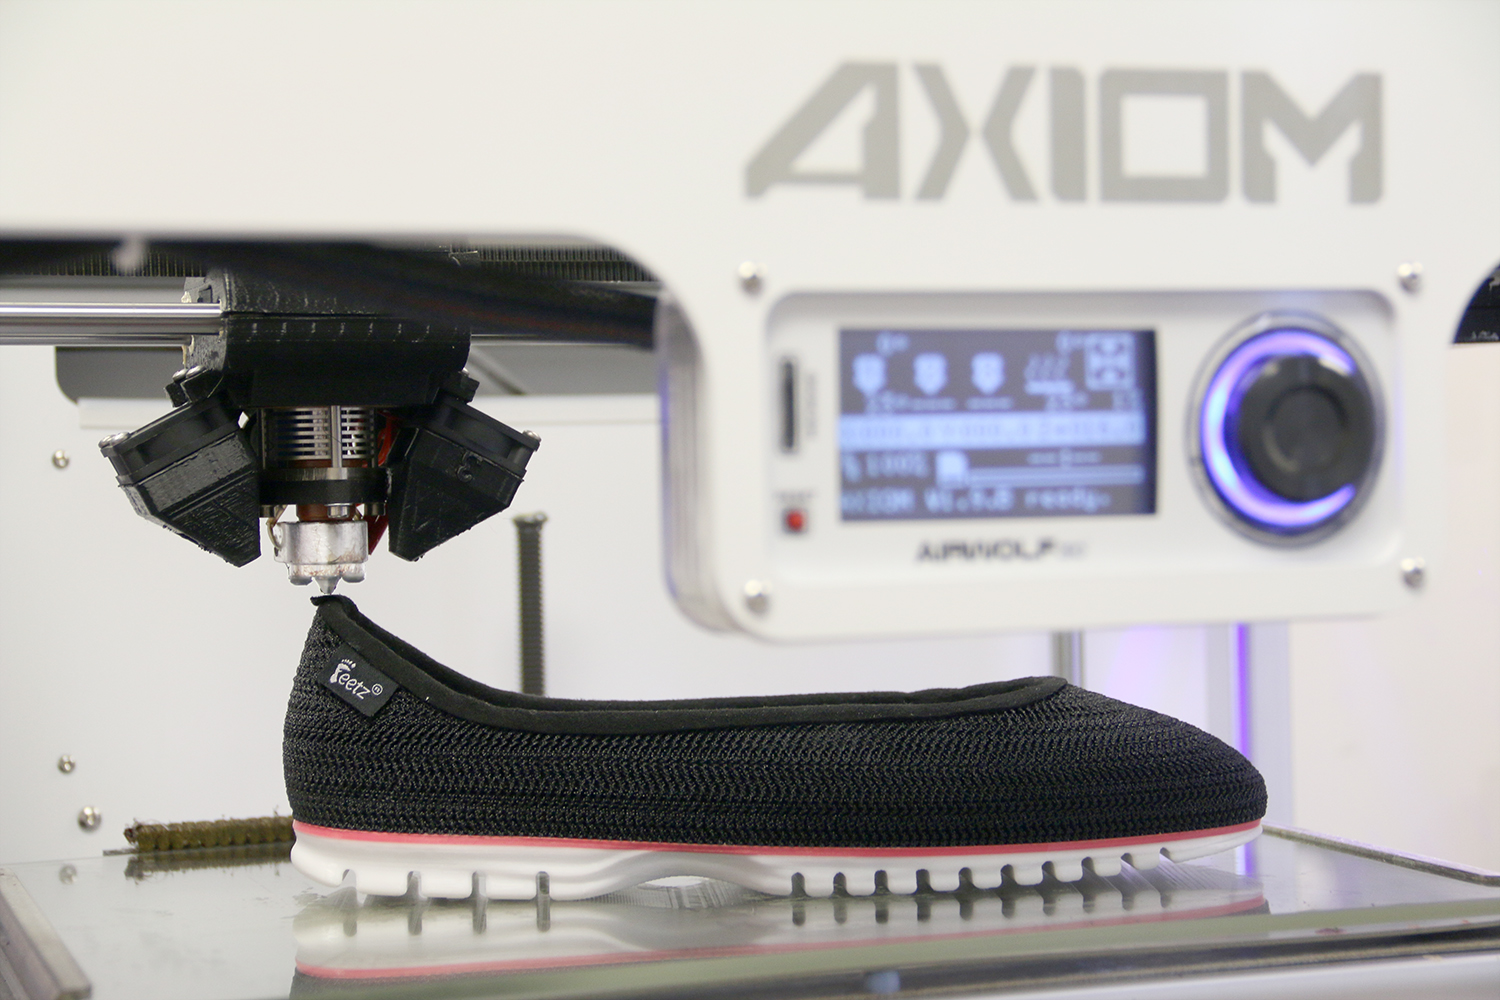 Feetz uses Airwolf 3D's mass customization 3D printers for manufacturing shoes.